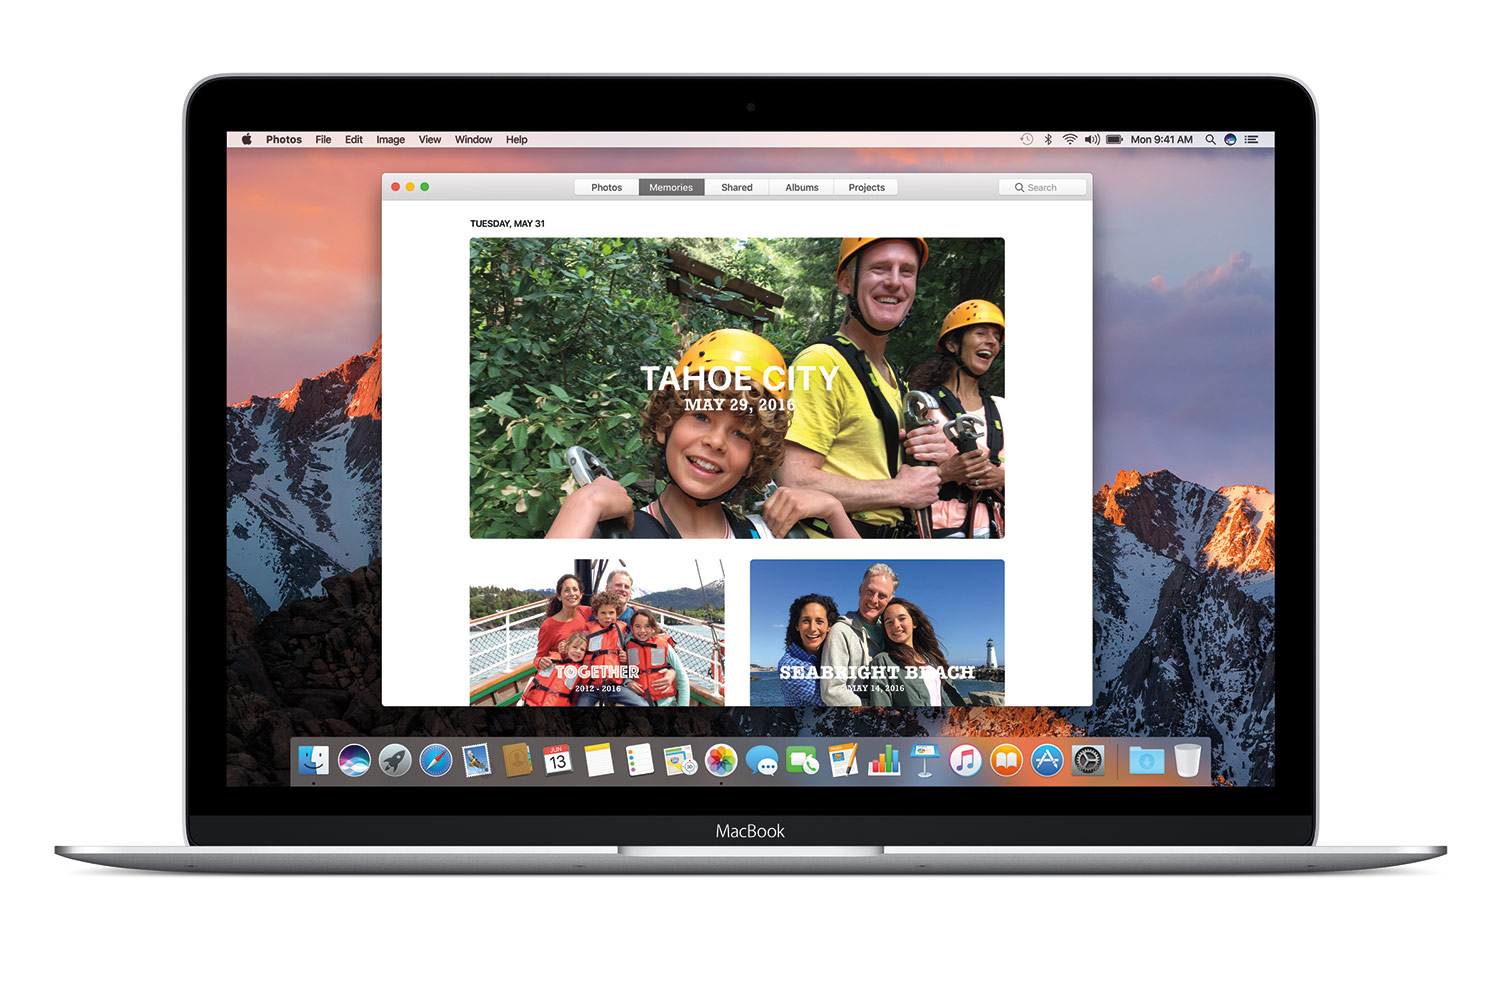 os x name change to macos and first version macossierra 002